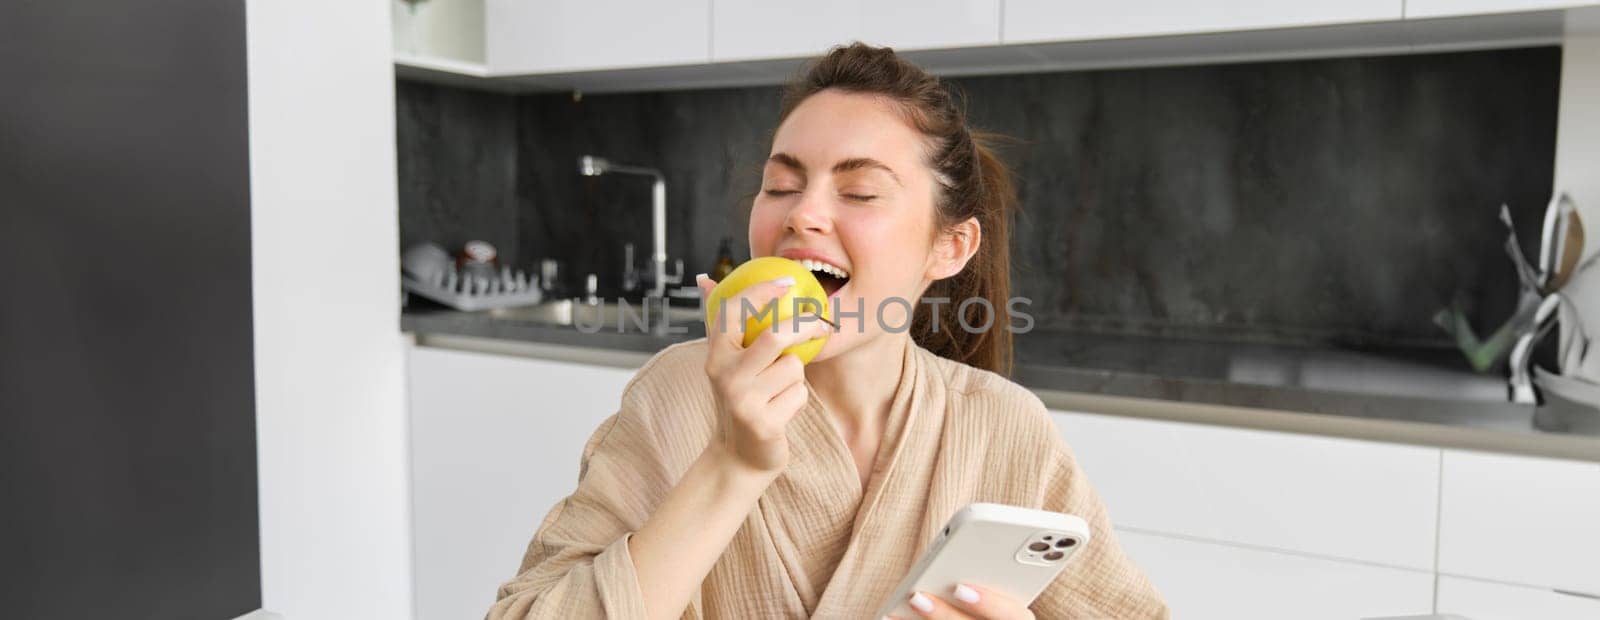 Portrait of happy, beautiful woman smiling, eating an apple in the kitchen, sitting at home in bathrobe, holding smartphone, using mobile phone.